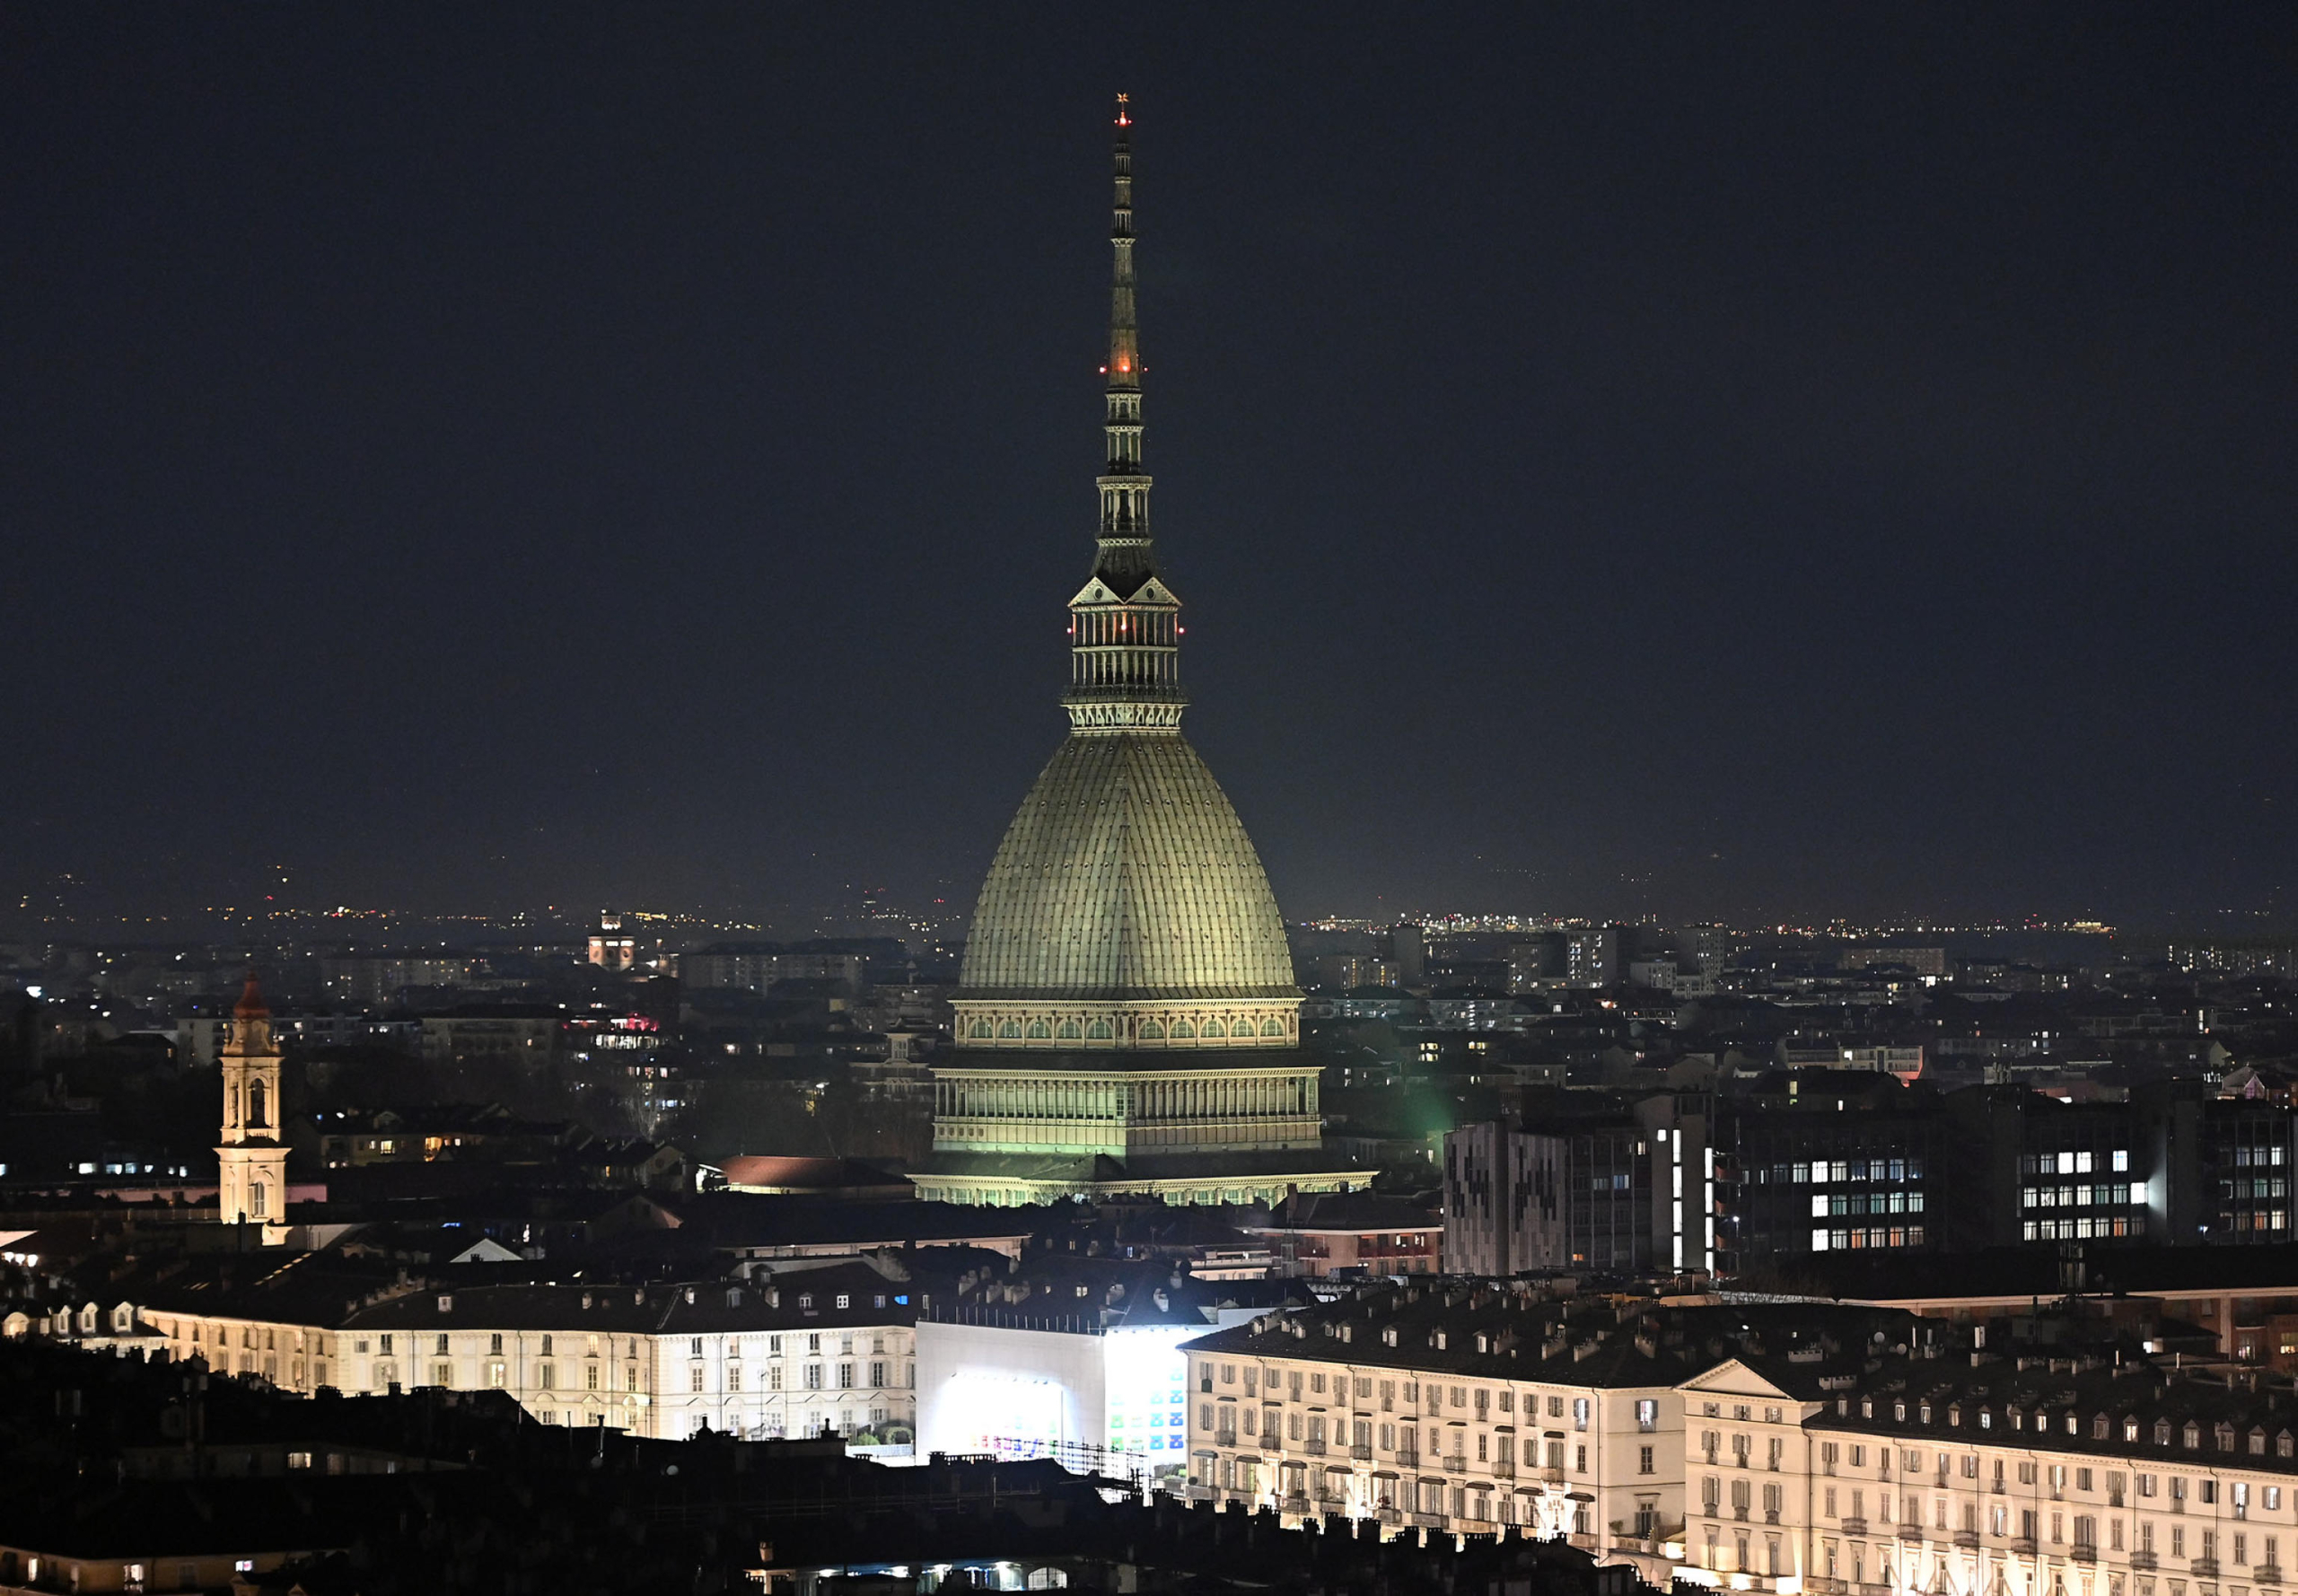 A view of the Mole Antonelliana with switched off illumination to mark Earth Hour, in Turin, Italy, 26 March 2022. Landmark buildings turn off their lights for one hour to take part in the Earth Hour movement as a sign of their commitment to the planet. Earth Hour is an annual event organized by the WWF World Wide Fund for Nature in which lights are switched off in major cities around the world to draw attention to energy consumption and its environmental effects. ANSA/ ALESSANDRO DI MARCO